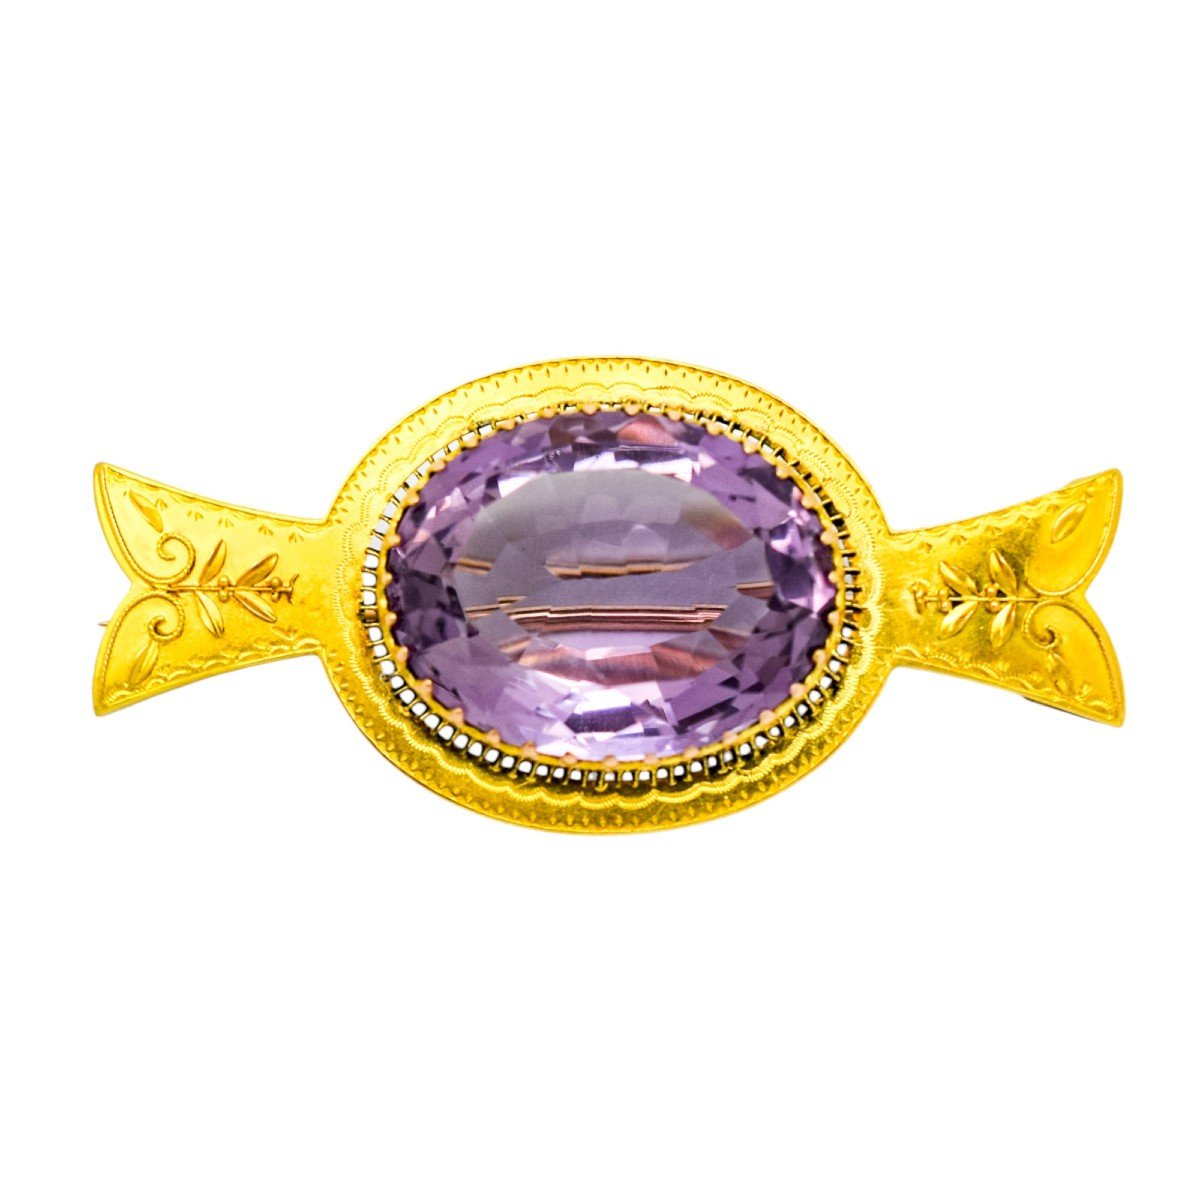 Exquisite Victorian 18ct Yellow Gold Etruscan Revival Brooch With Amethyst-photo-1